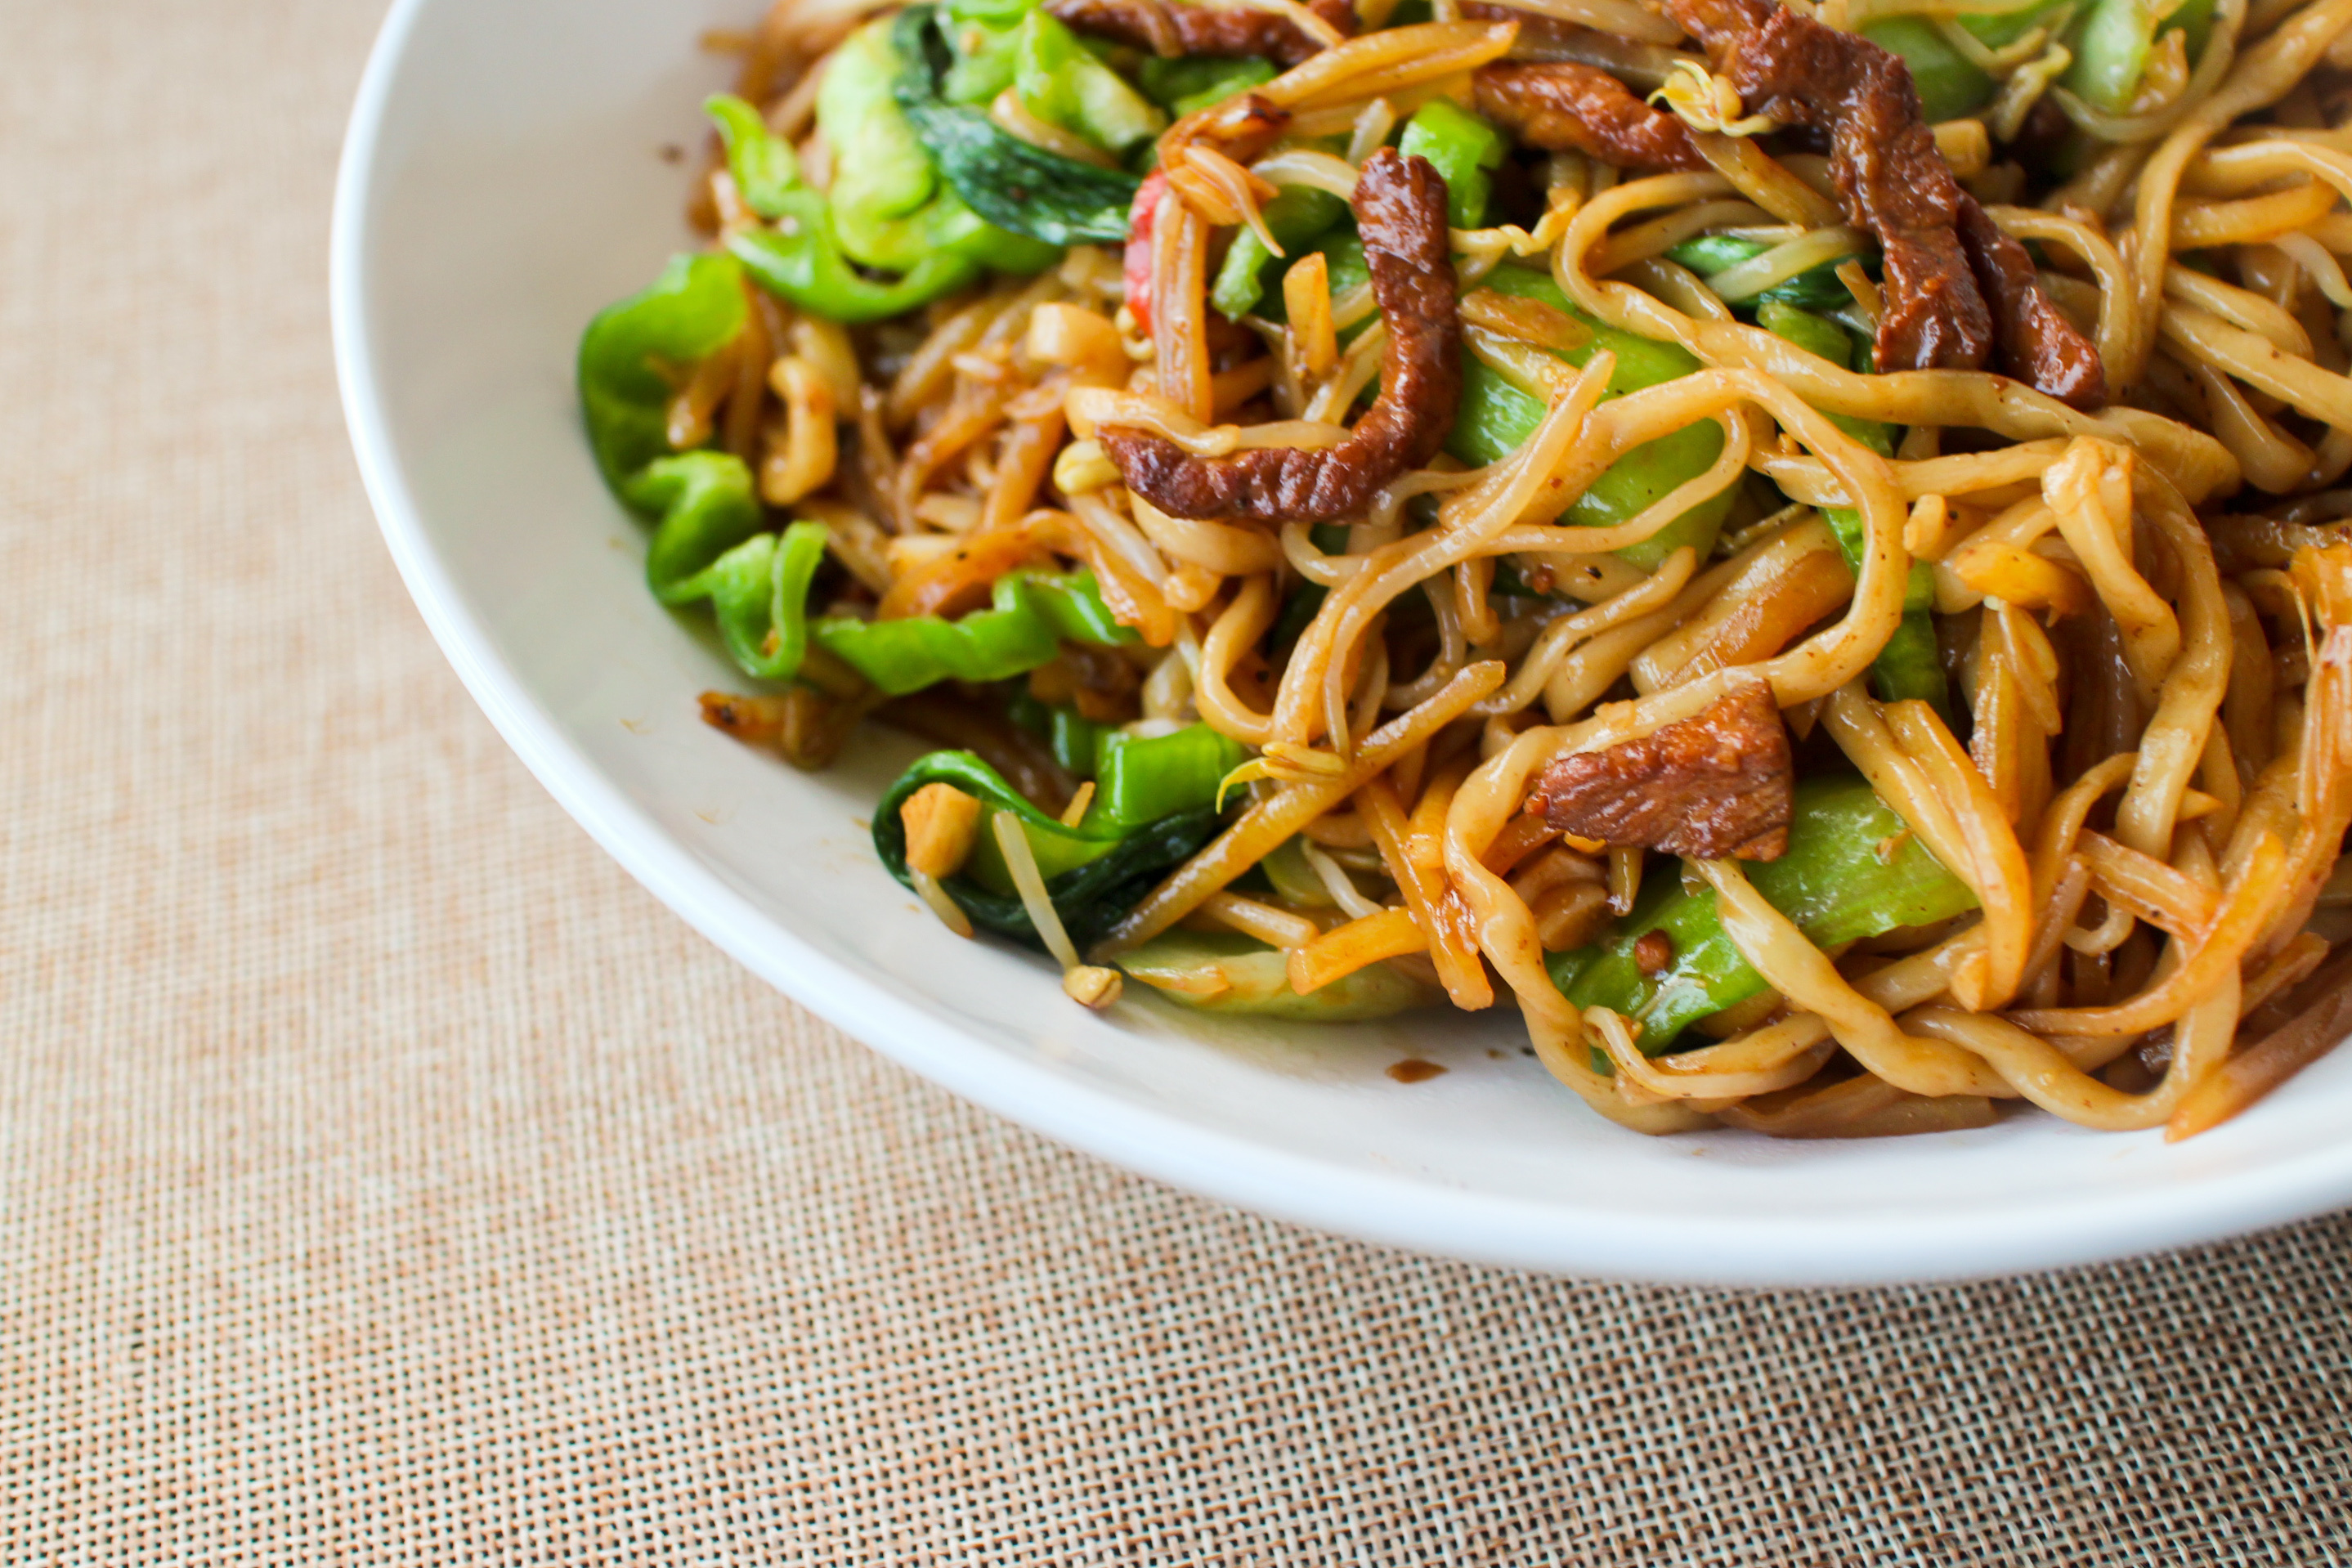 
The practice of chow mien of authentic shredded meat, how is the most authentic practice solution _ done delicious